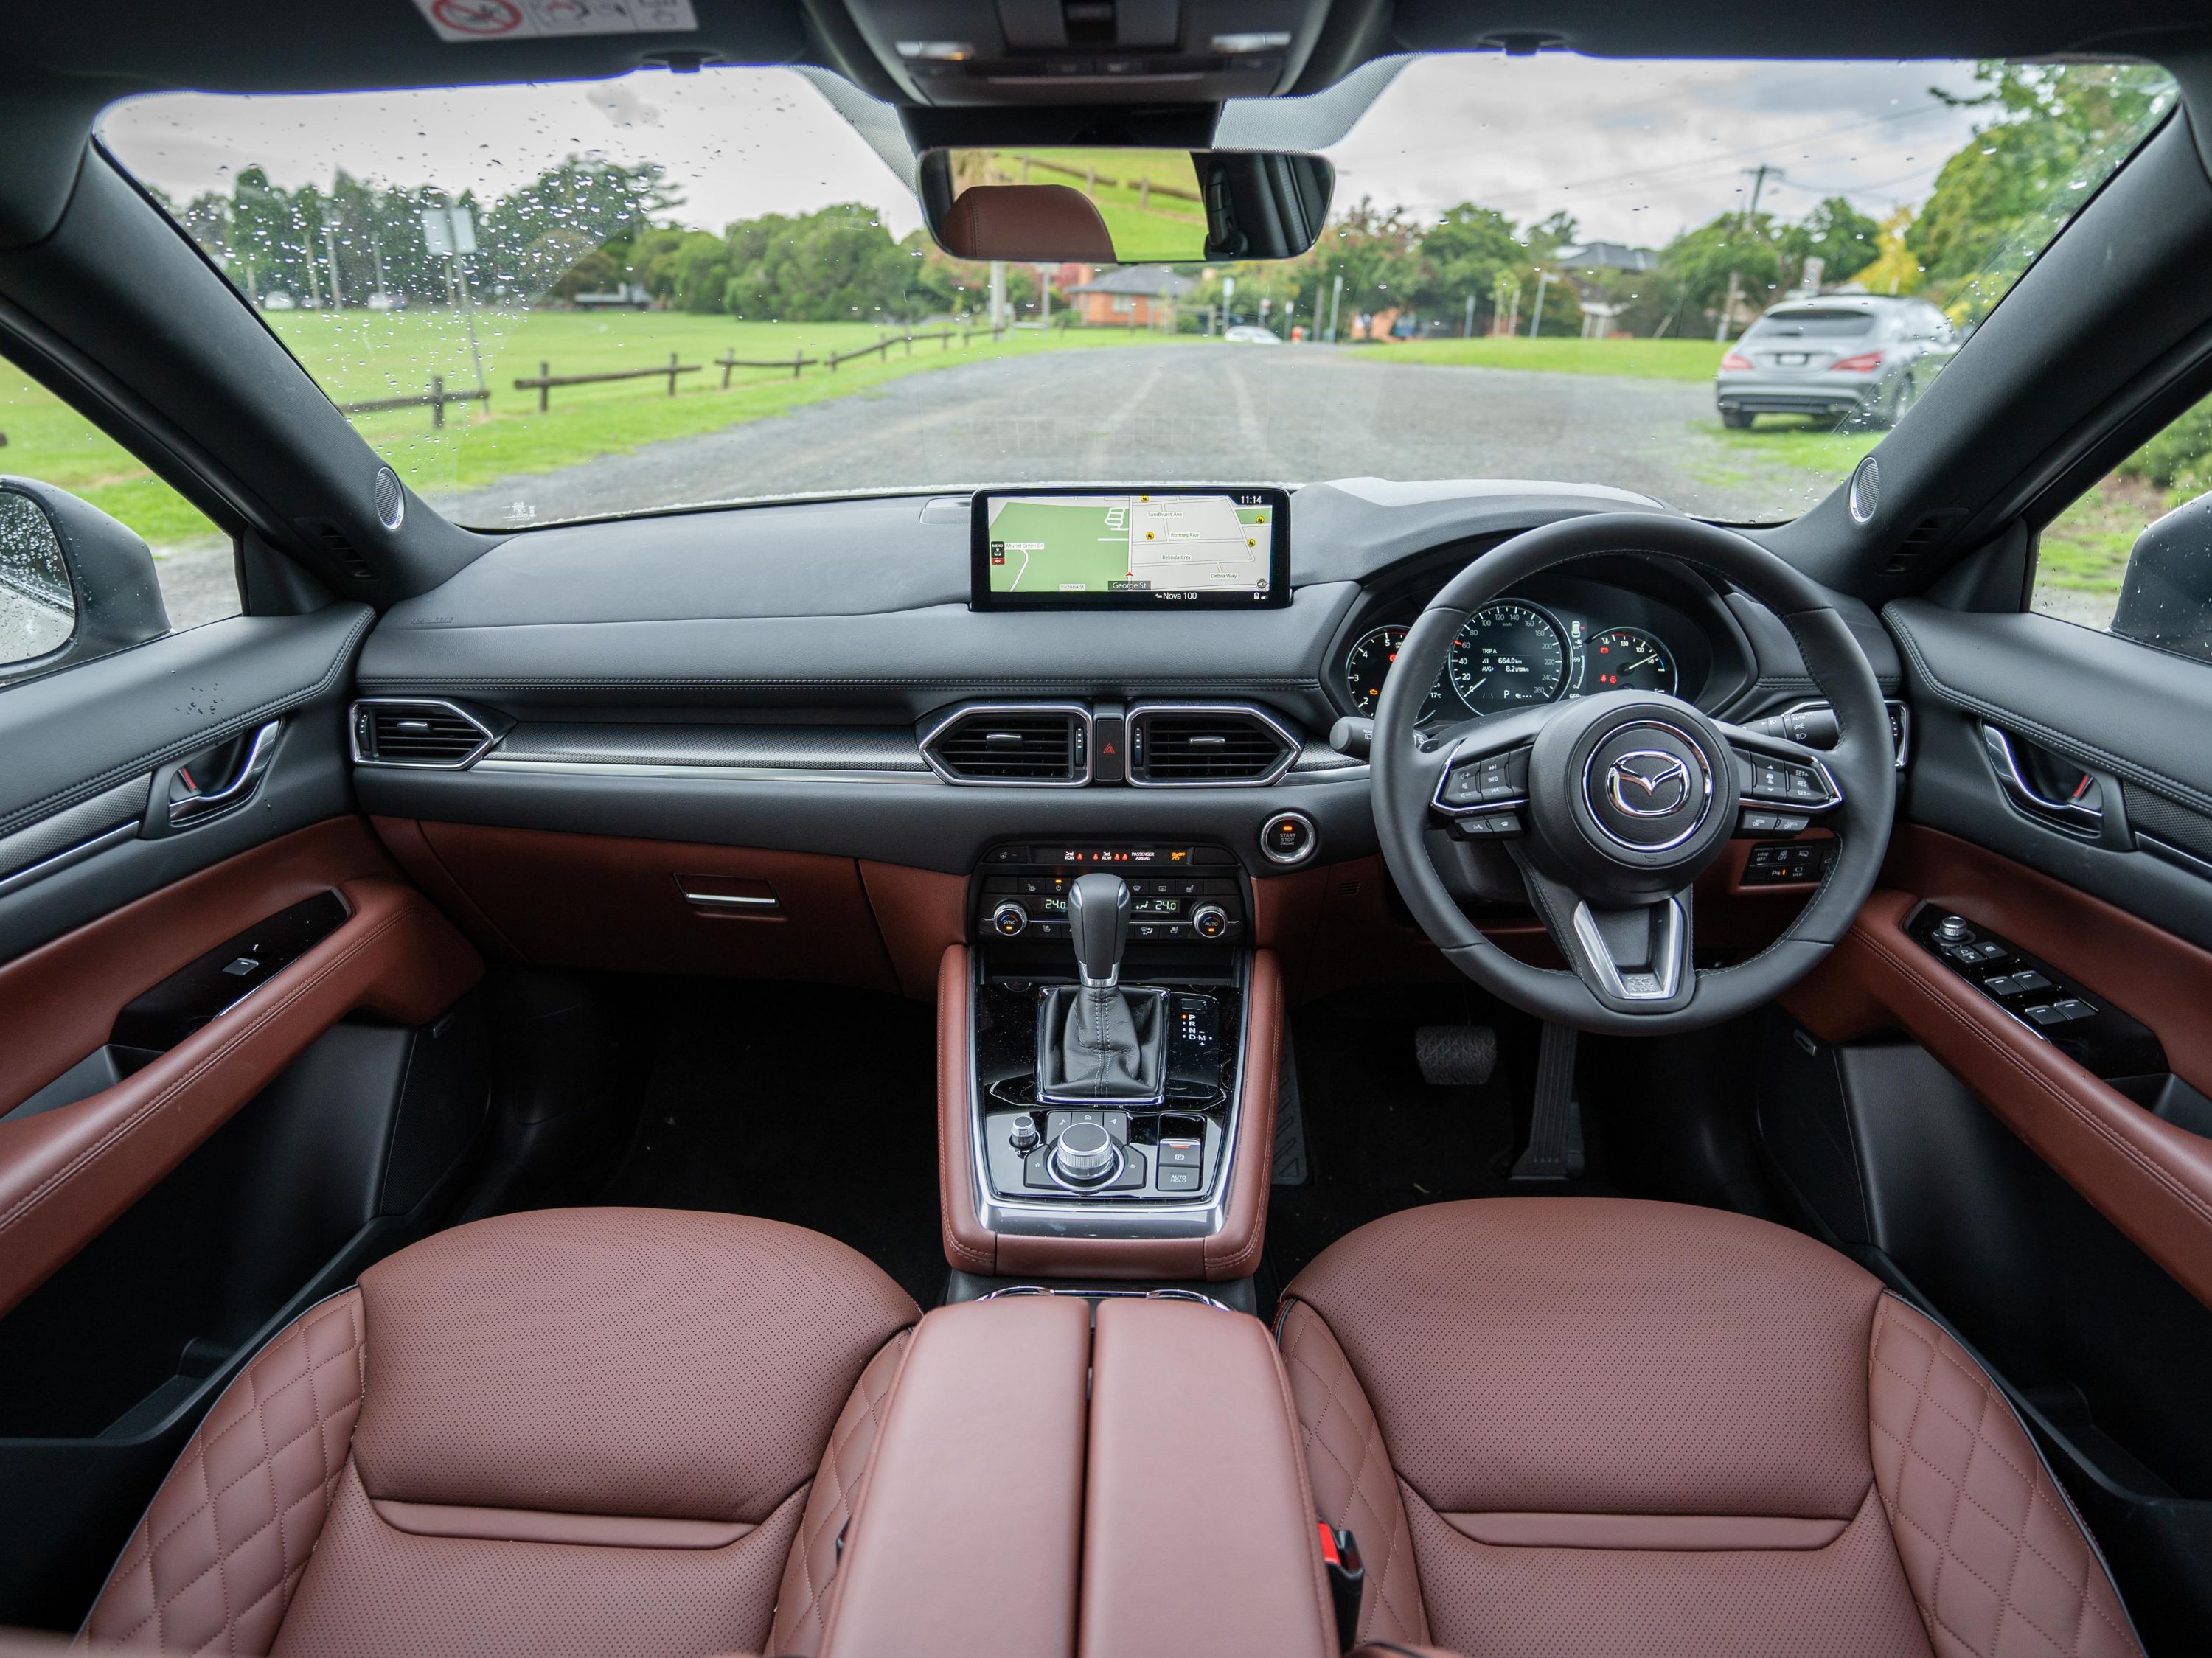 Mazda CX-8 Interior Images & Photos - See the Inside of the Latest Mazda CX- 8